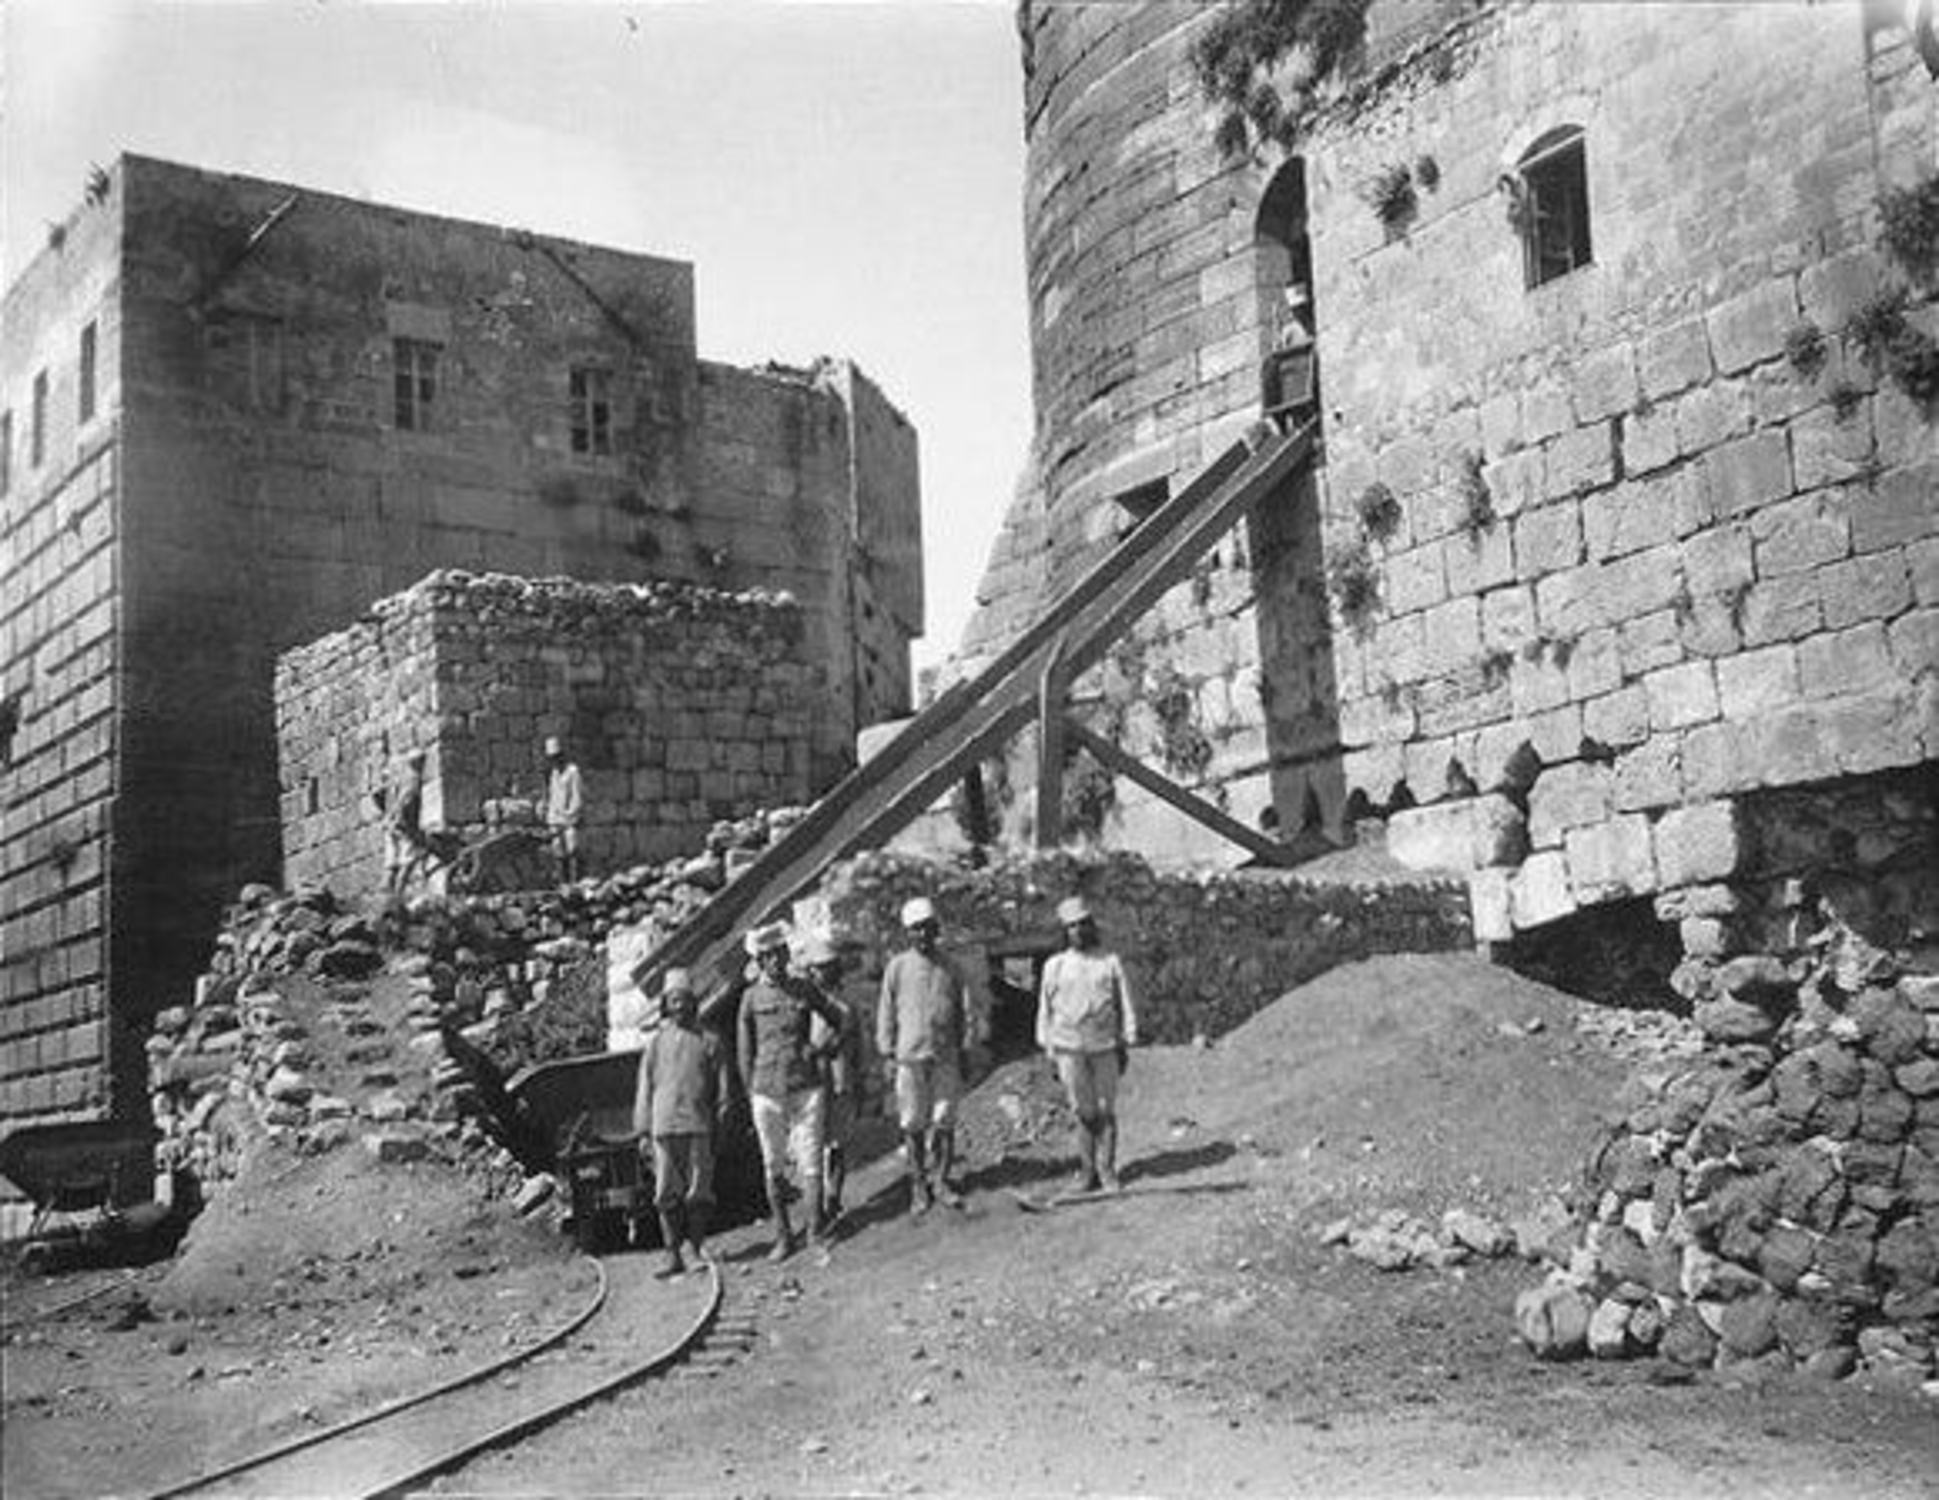 Photograph of the excavations at the Krak des Chevaliers